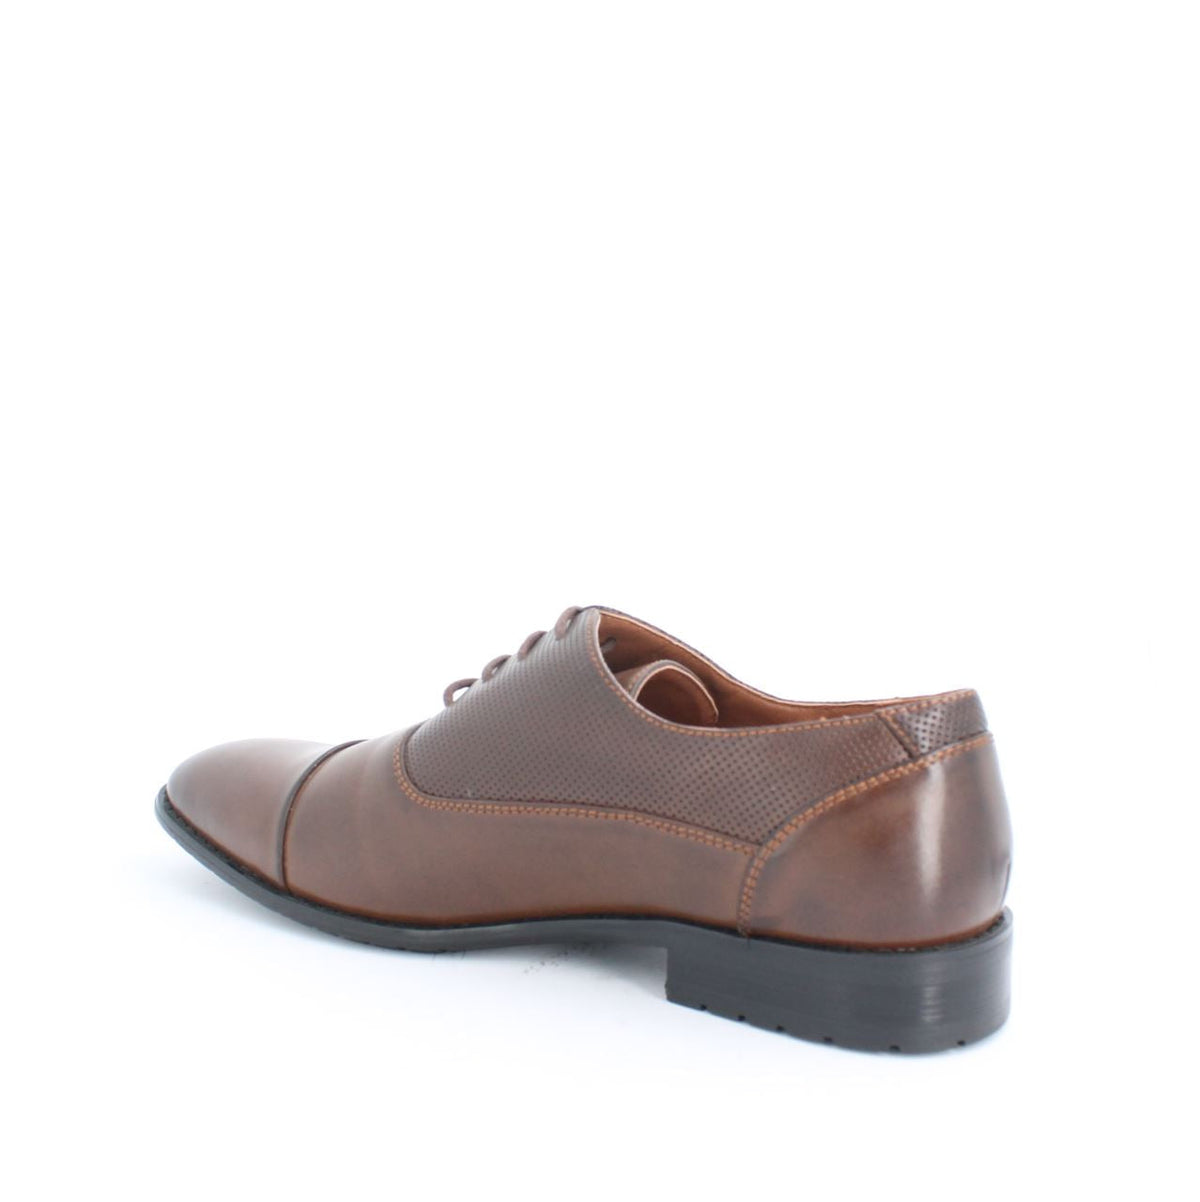 VEEONIA OXFORD SHOES - BROWN